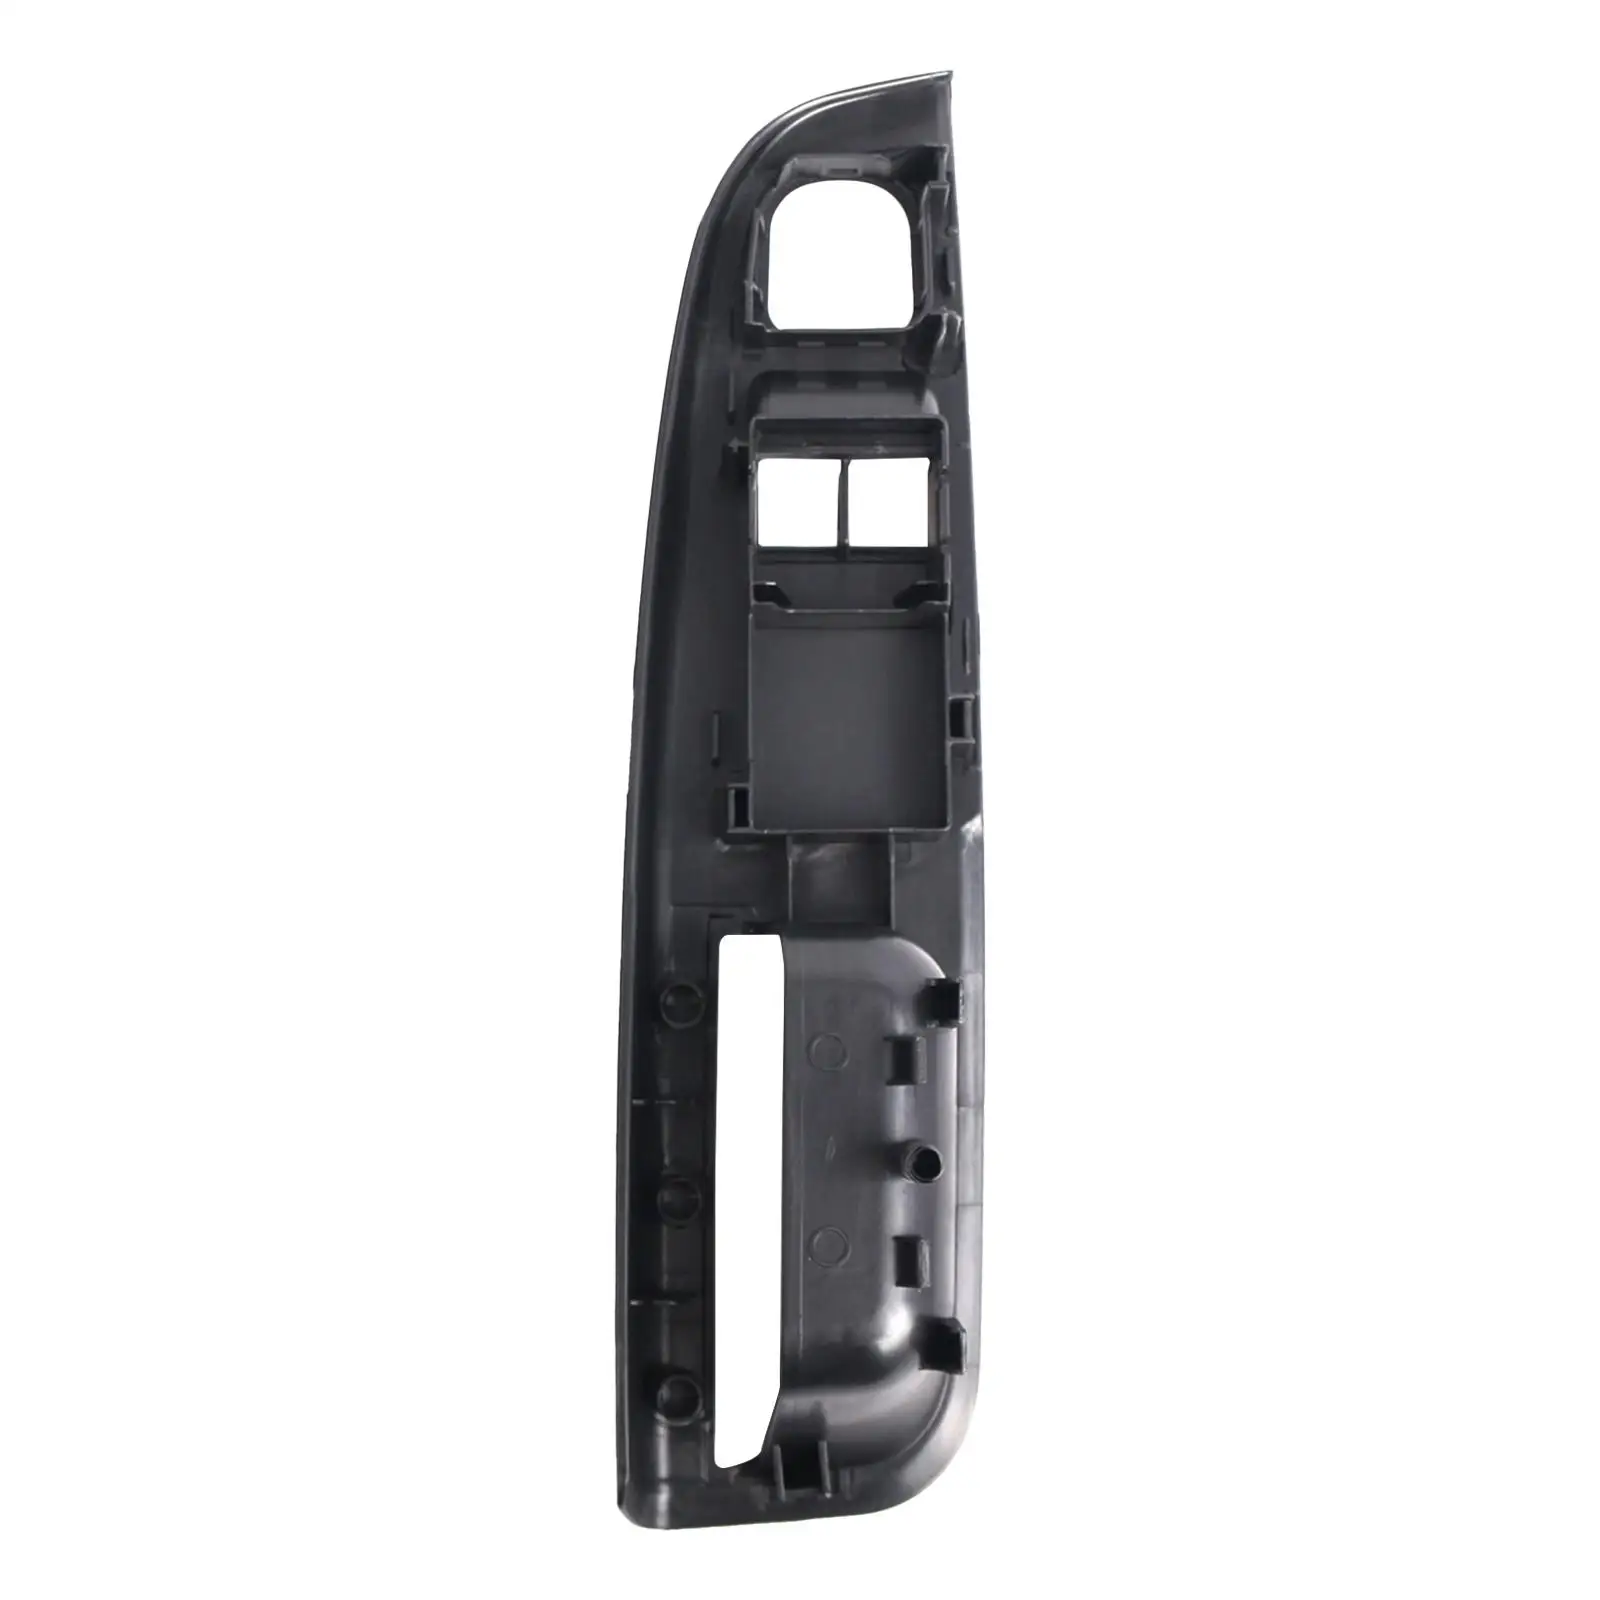 Driver Front Left Side Door Trim 1K3868049B Replace Black for VW Golf GTI Interior Control Cover Accessory Good Performance